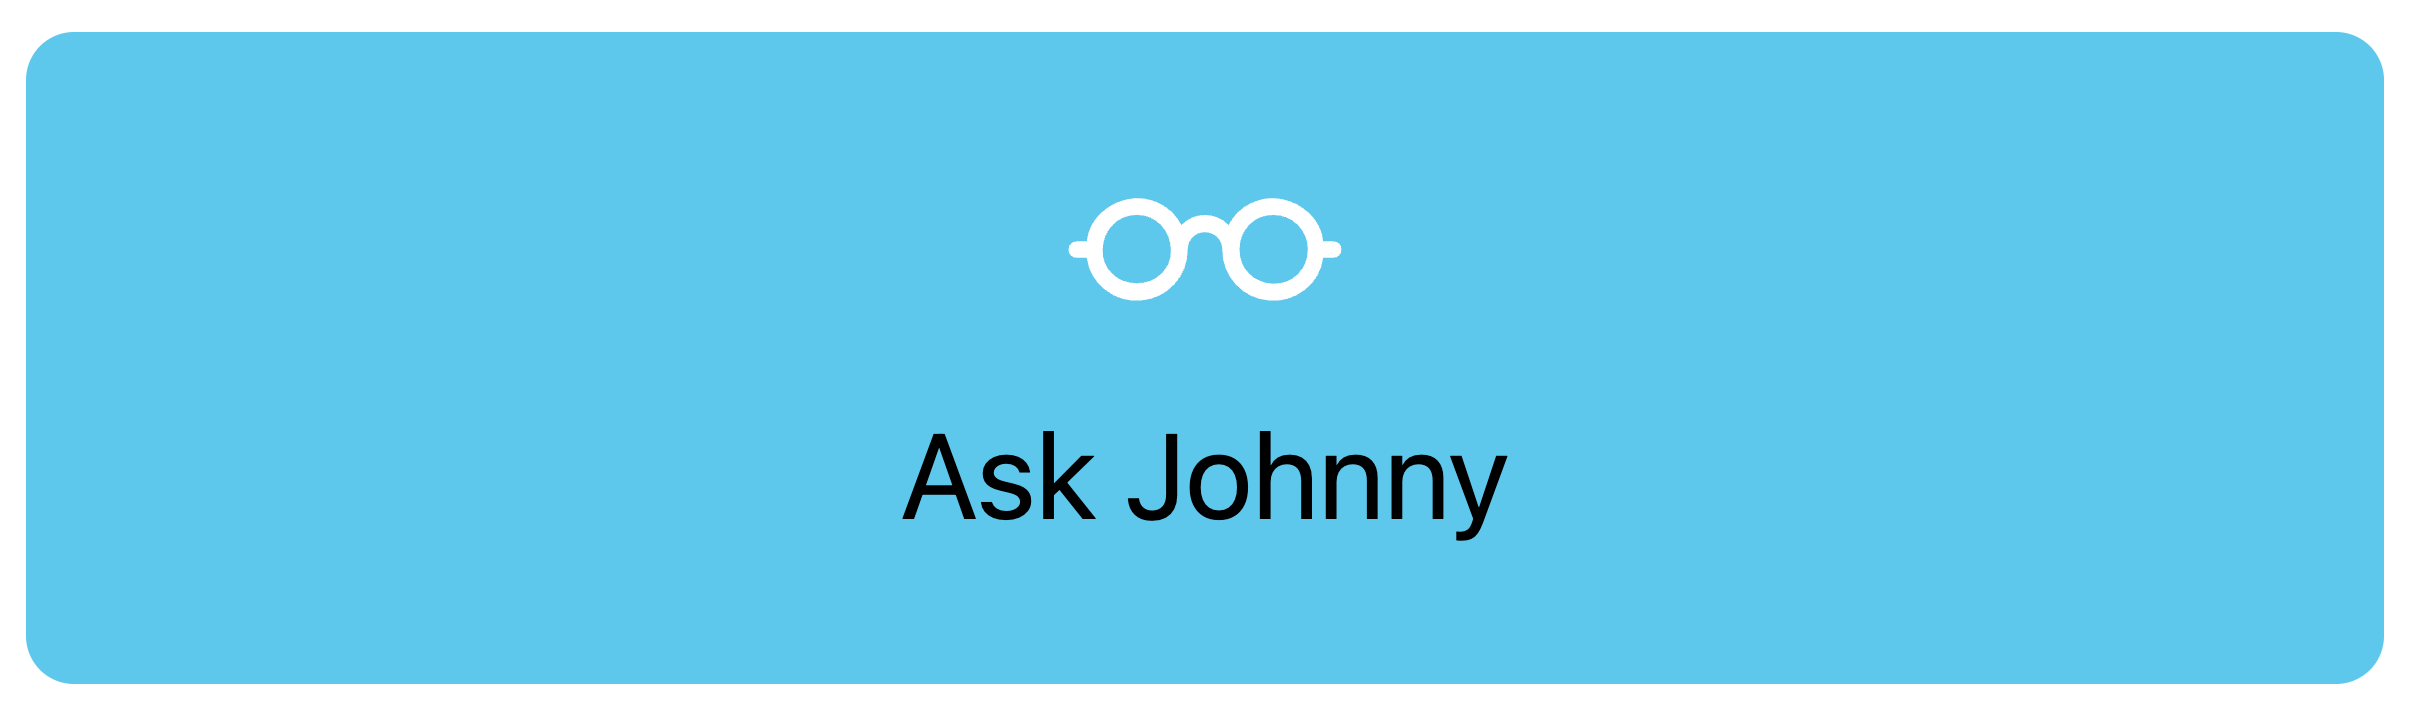 Ask Johnny